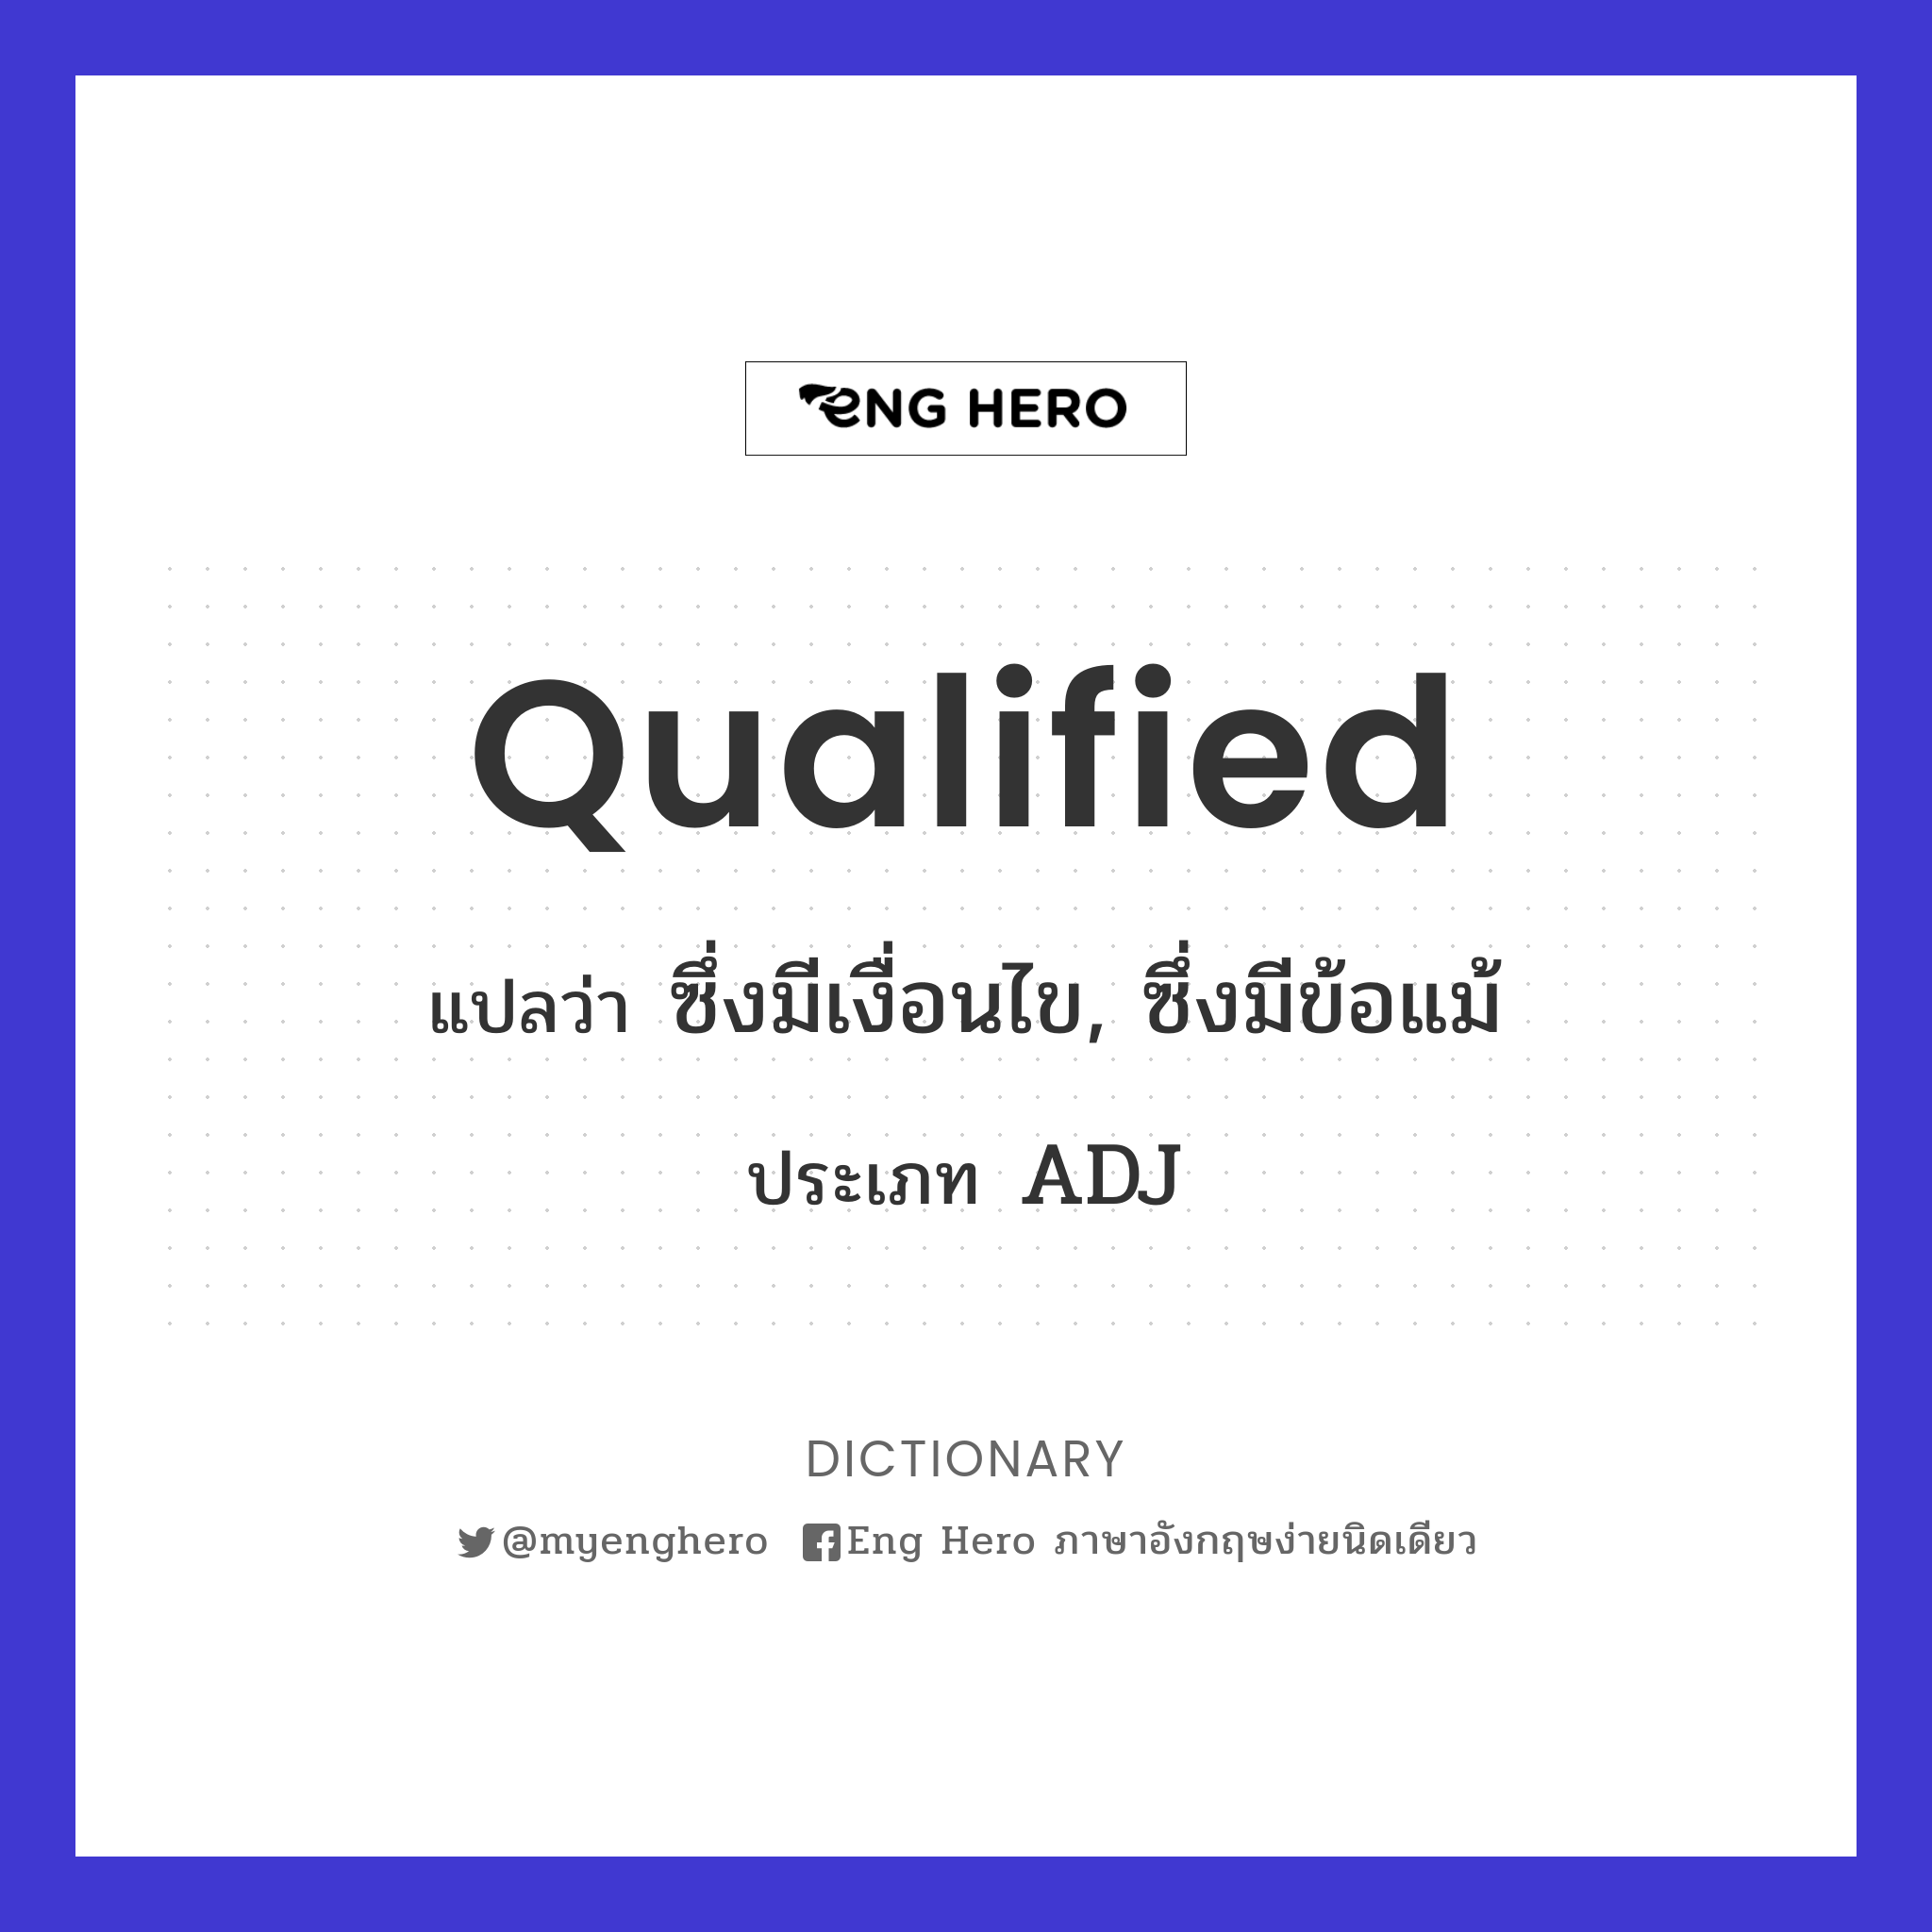 qualified